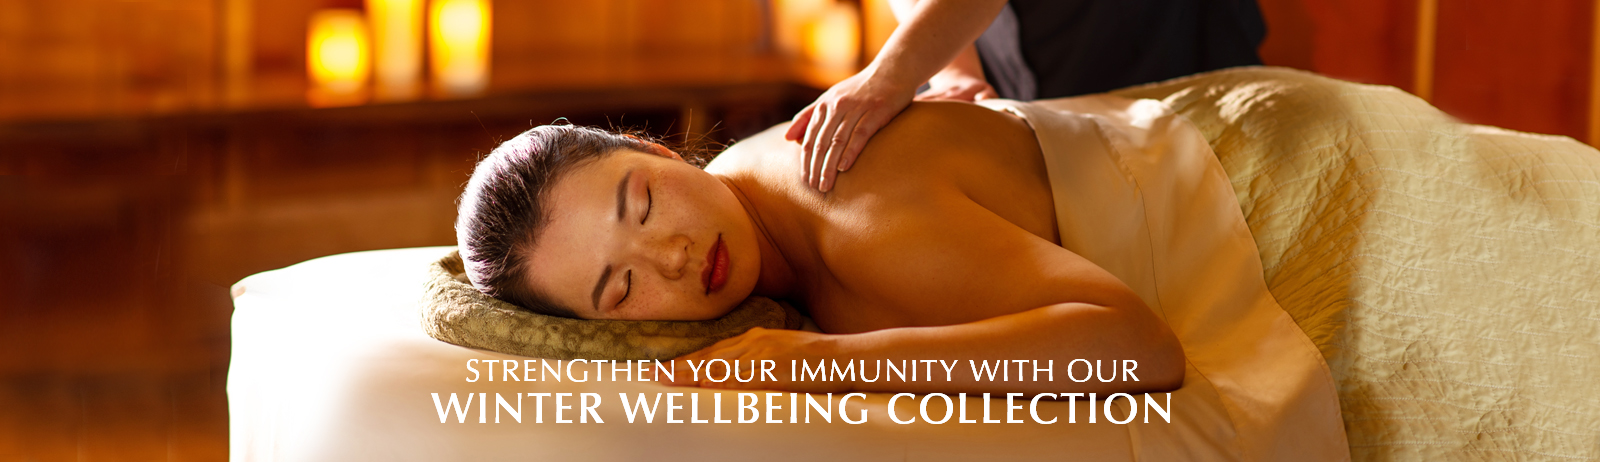 Winter Wellbeing Collection at Mohonk